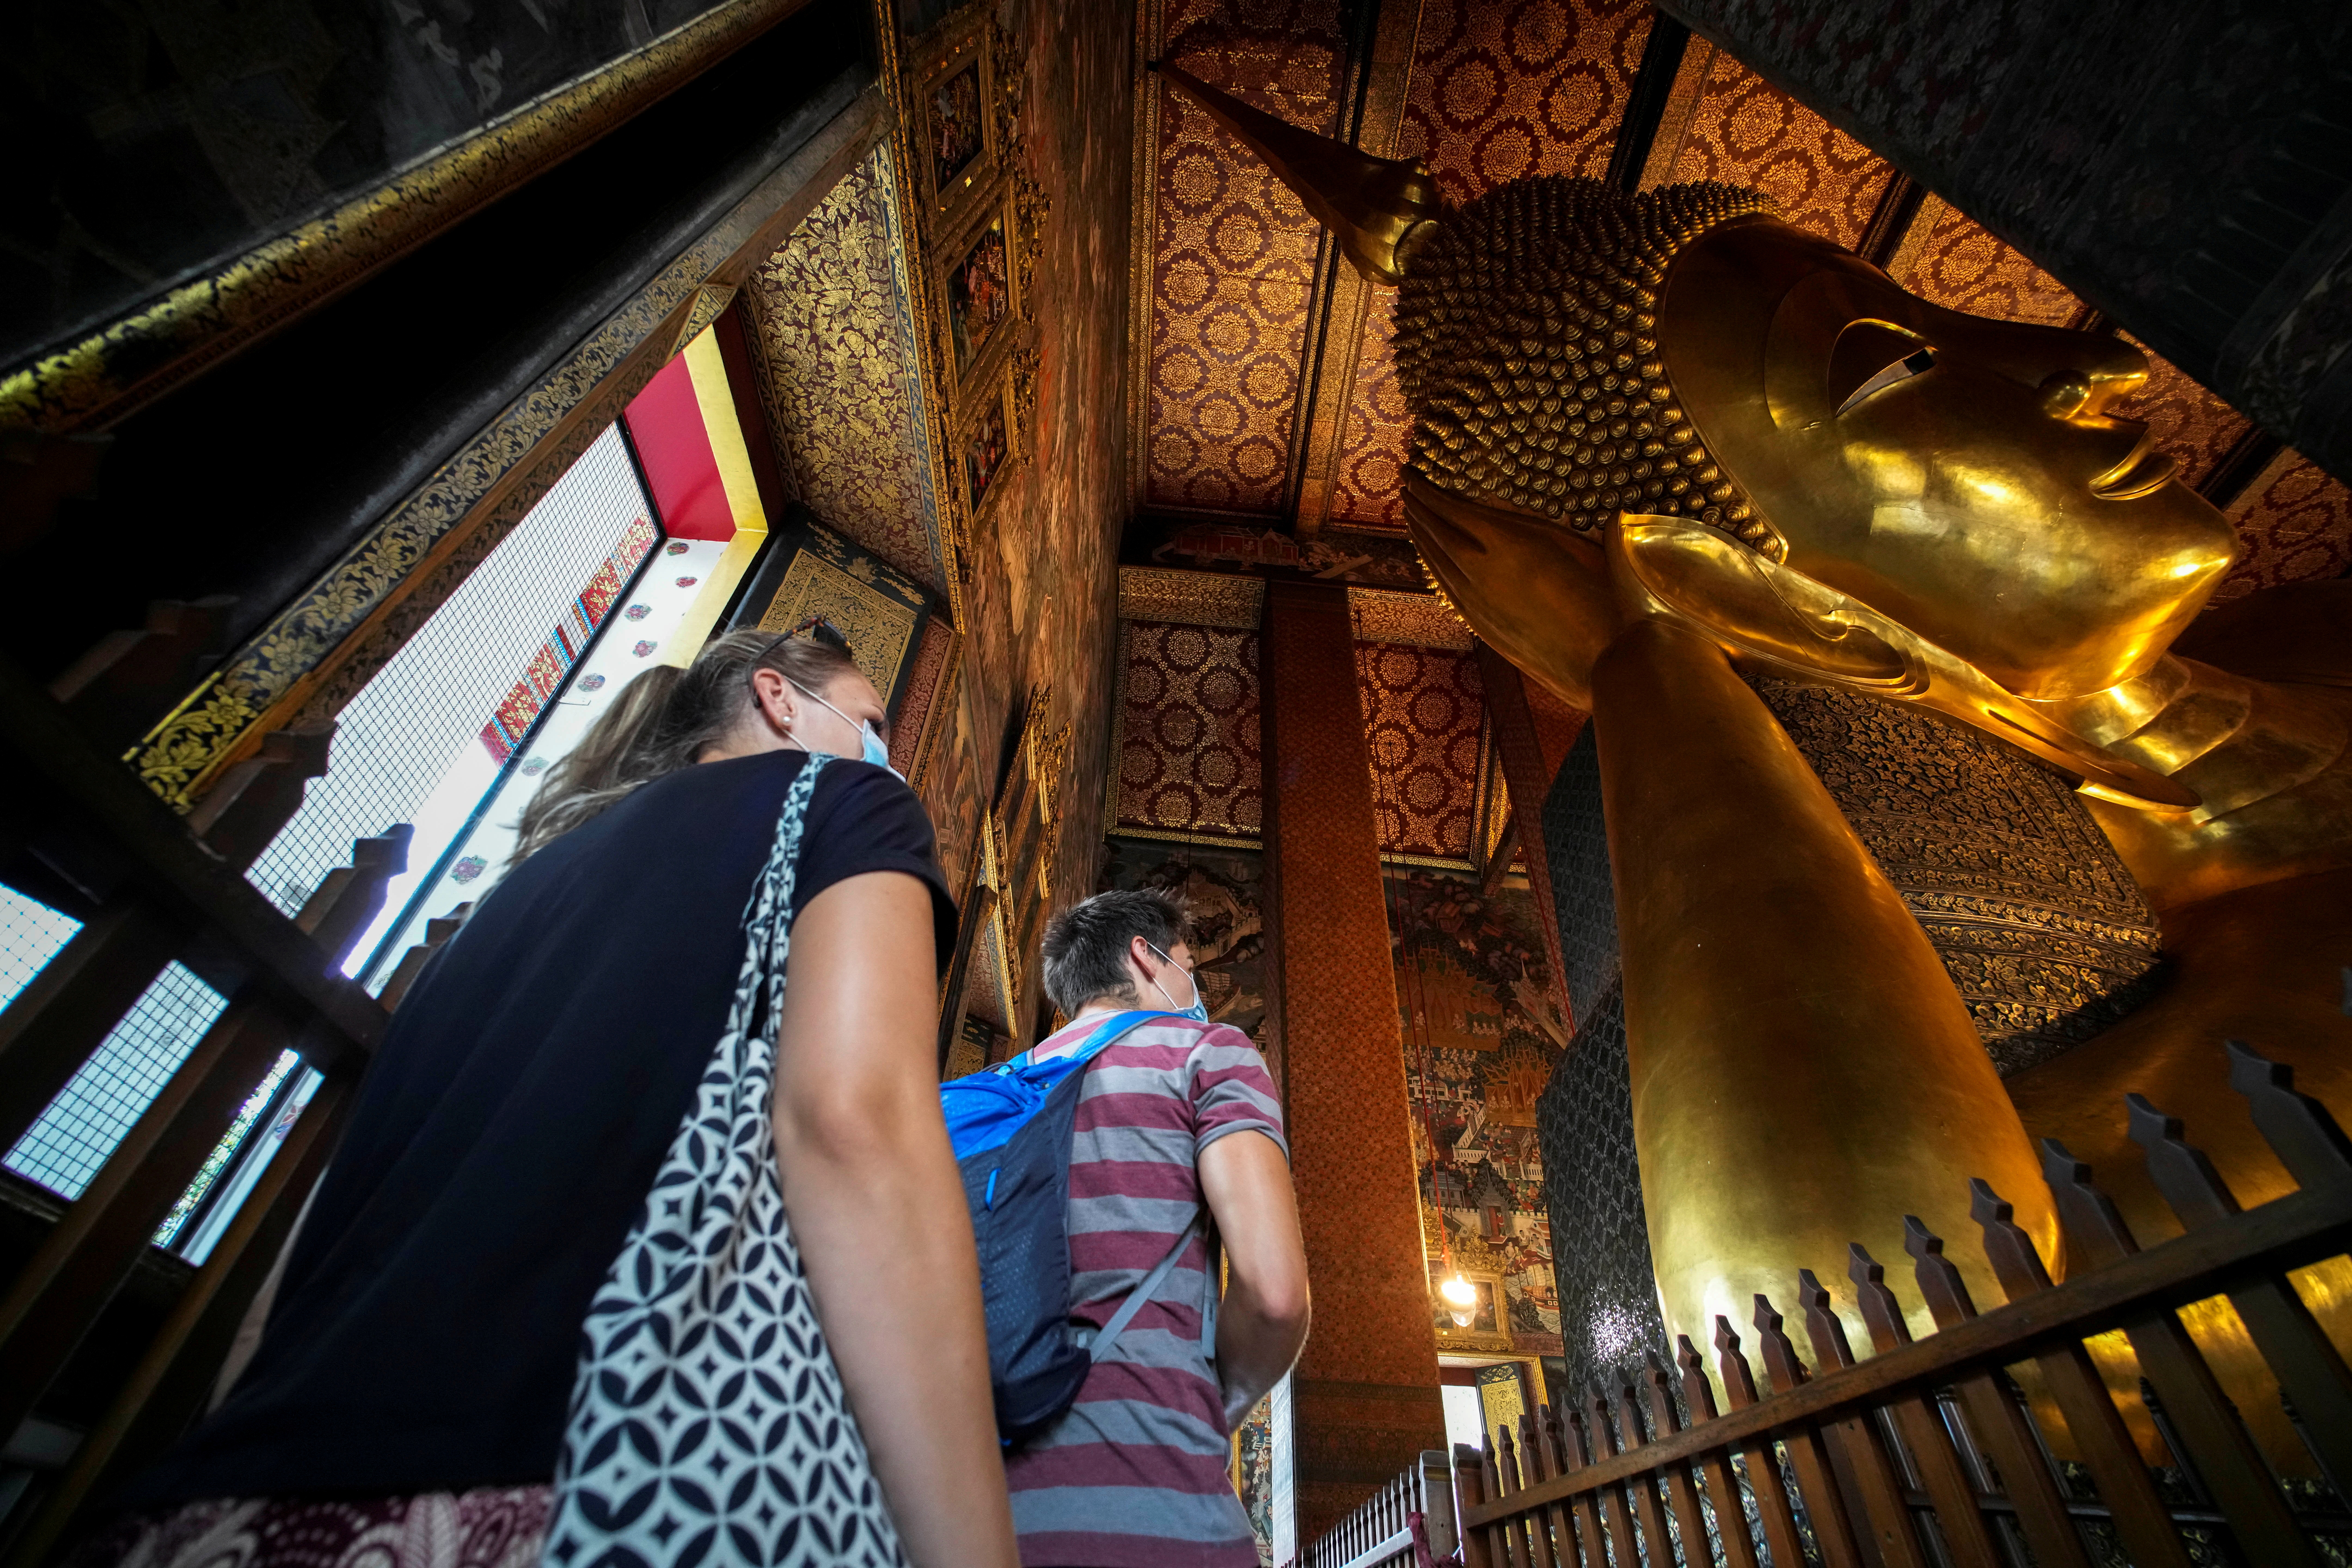 Foreign tourists are seen next to the Reclining Buddha at Wat Pho, a day after country's reopening campaign which is a part of the government's plan to jump start the pandemic-hit tourism sector in Bangkok, Thailand, November 2, 2021. REUTERS/Athit Perawongmetha/File Photo